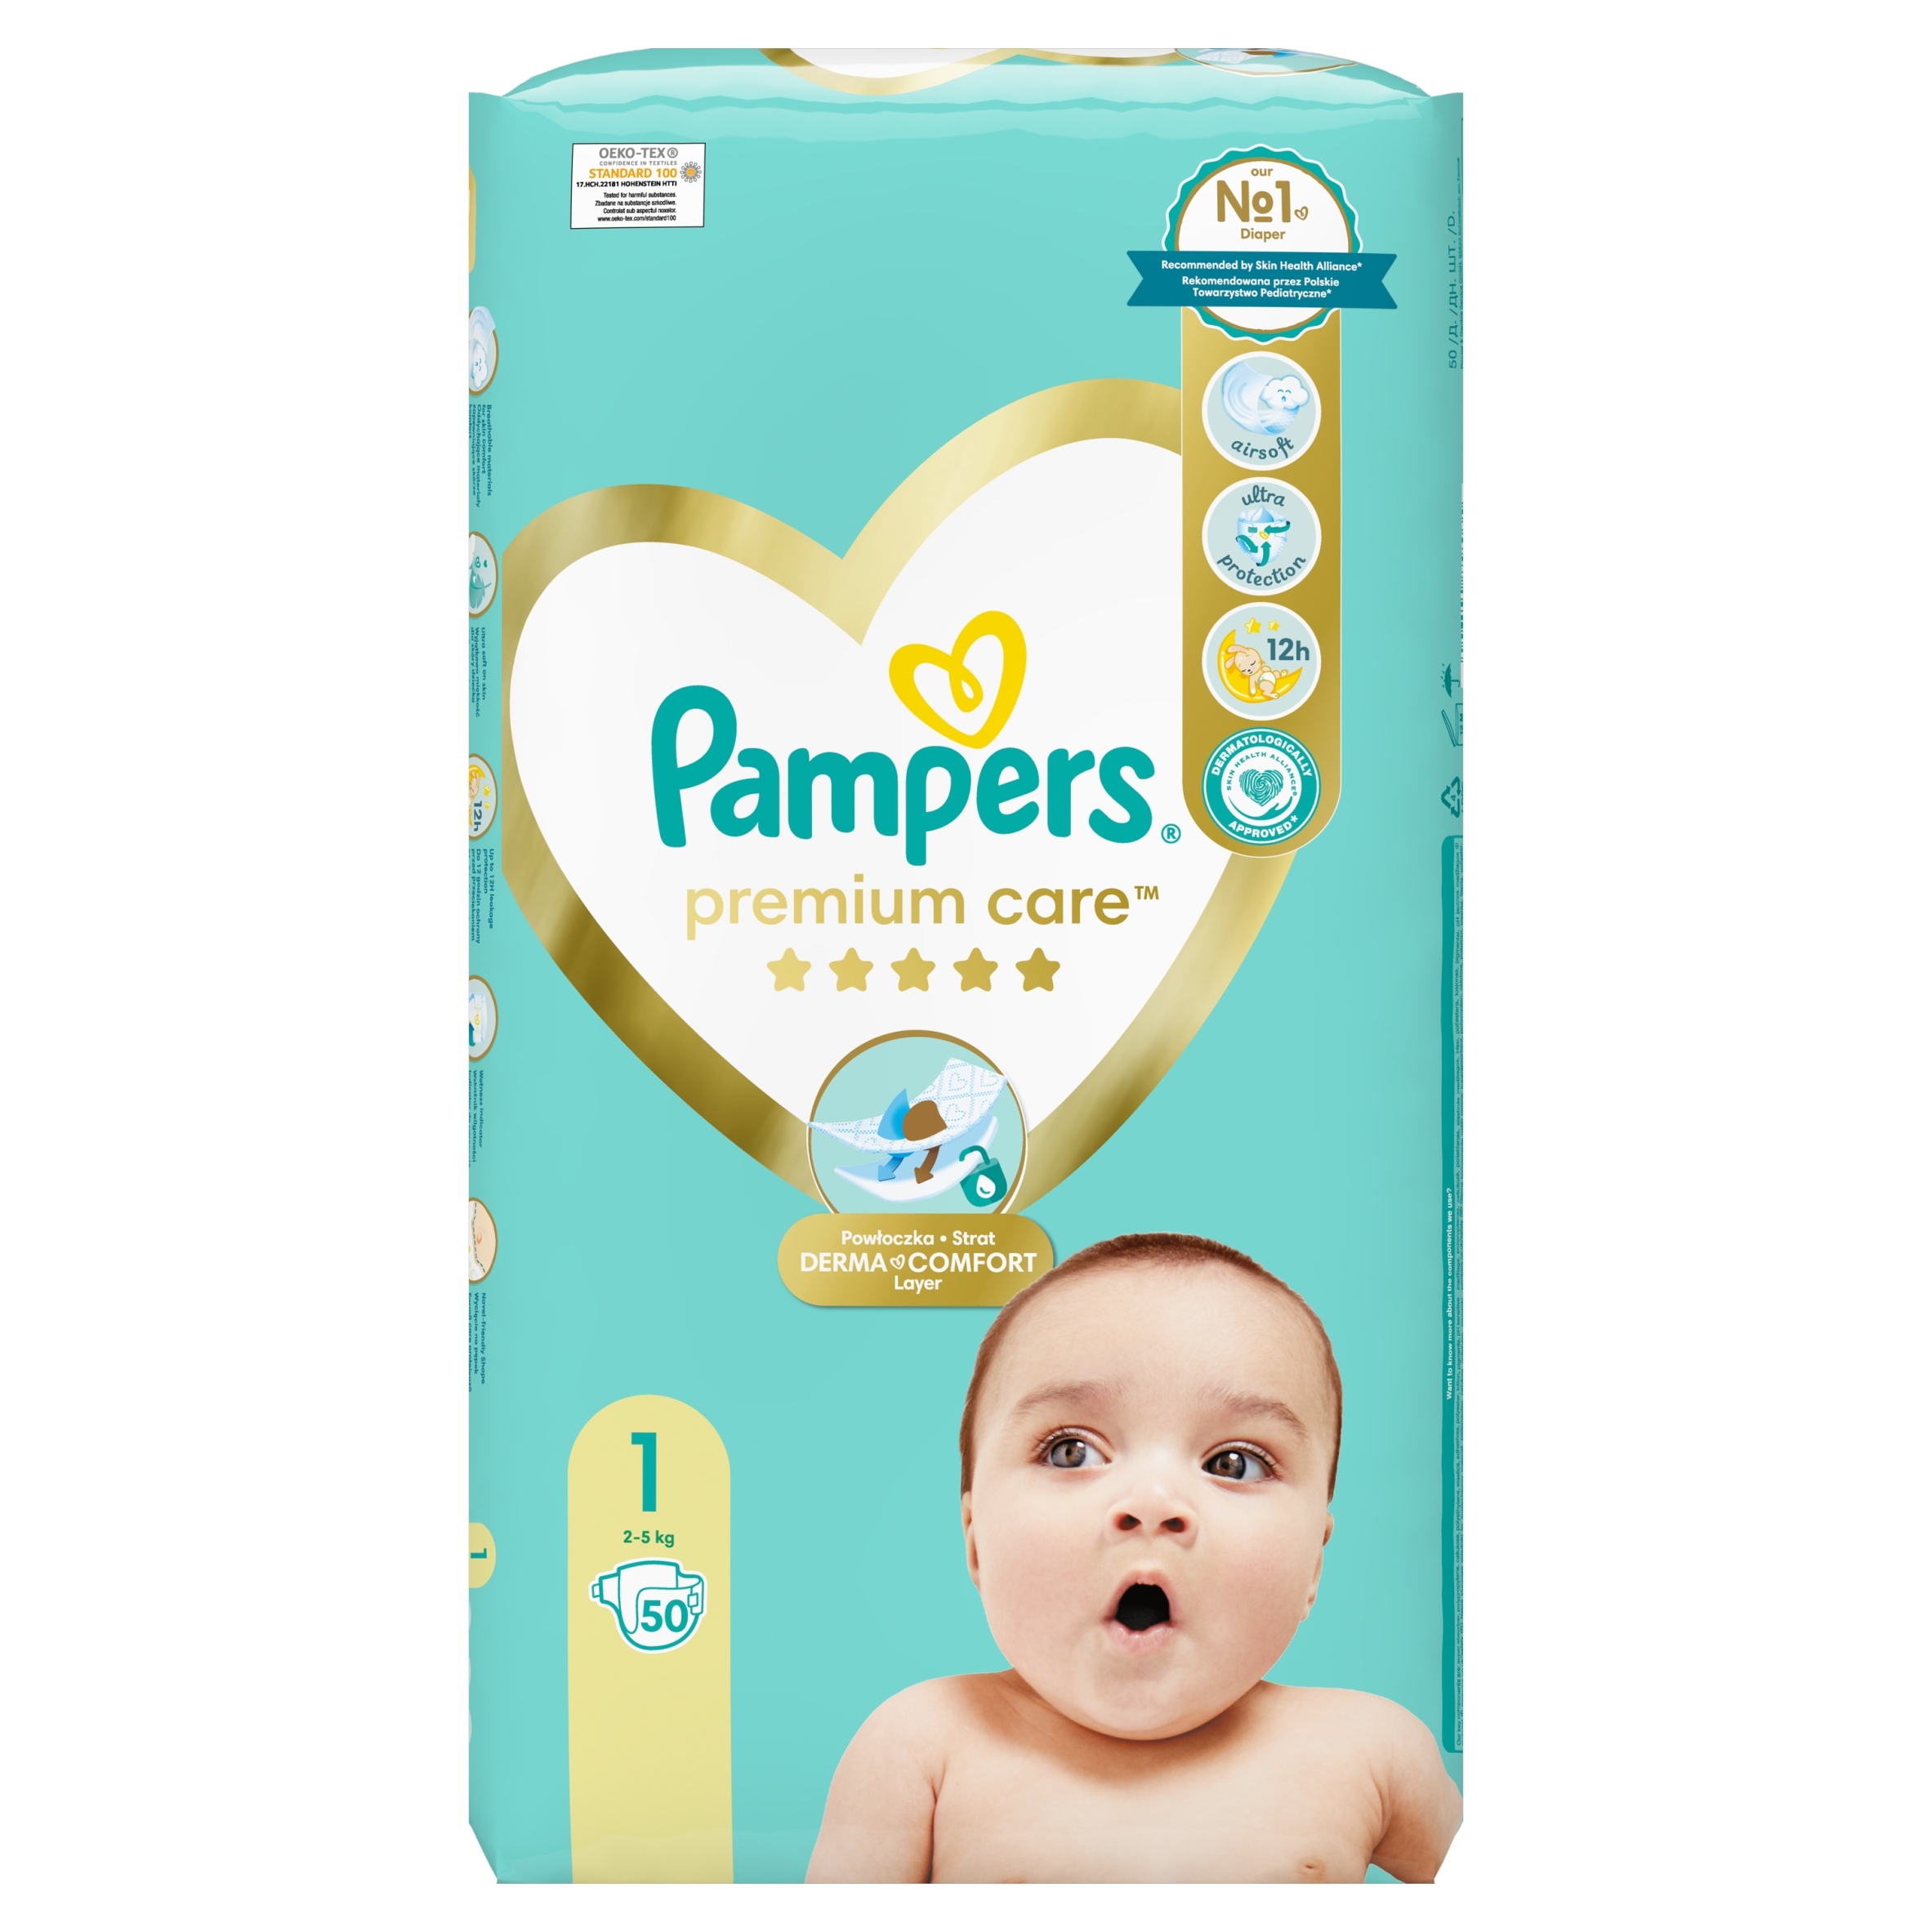 pampers care 4 promocja